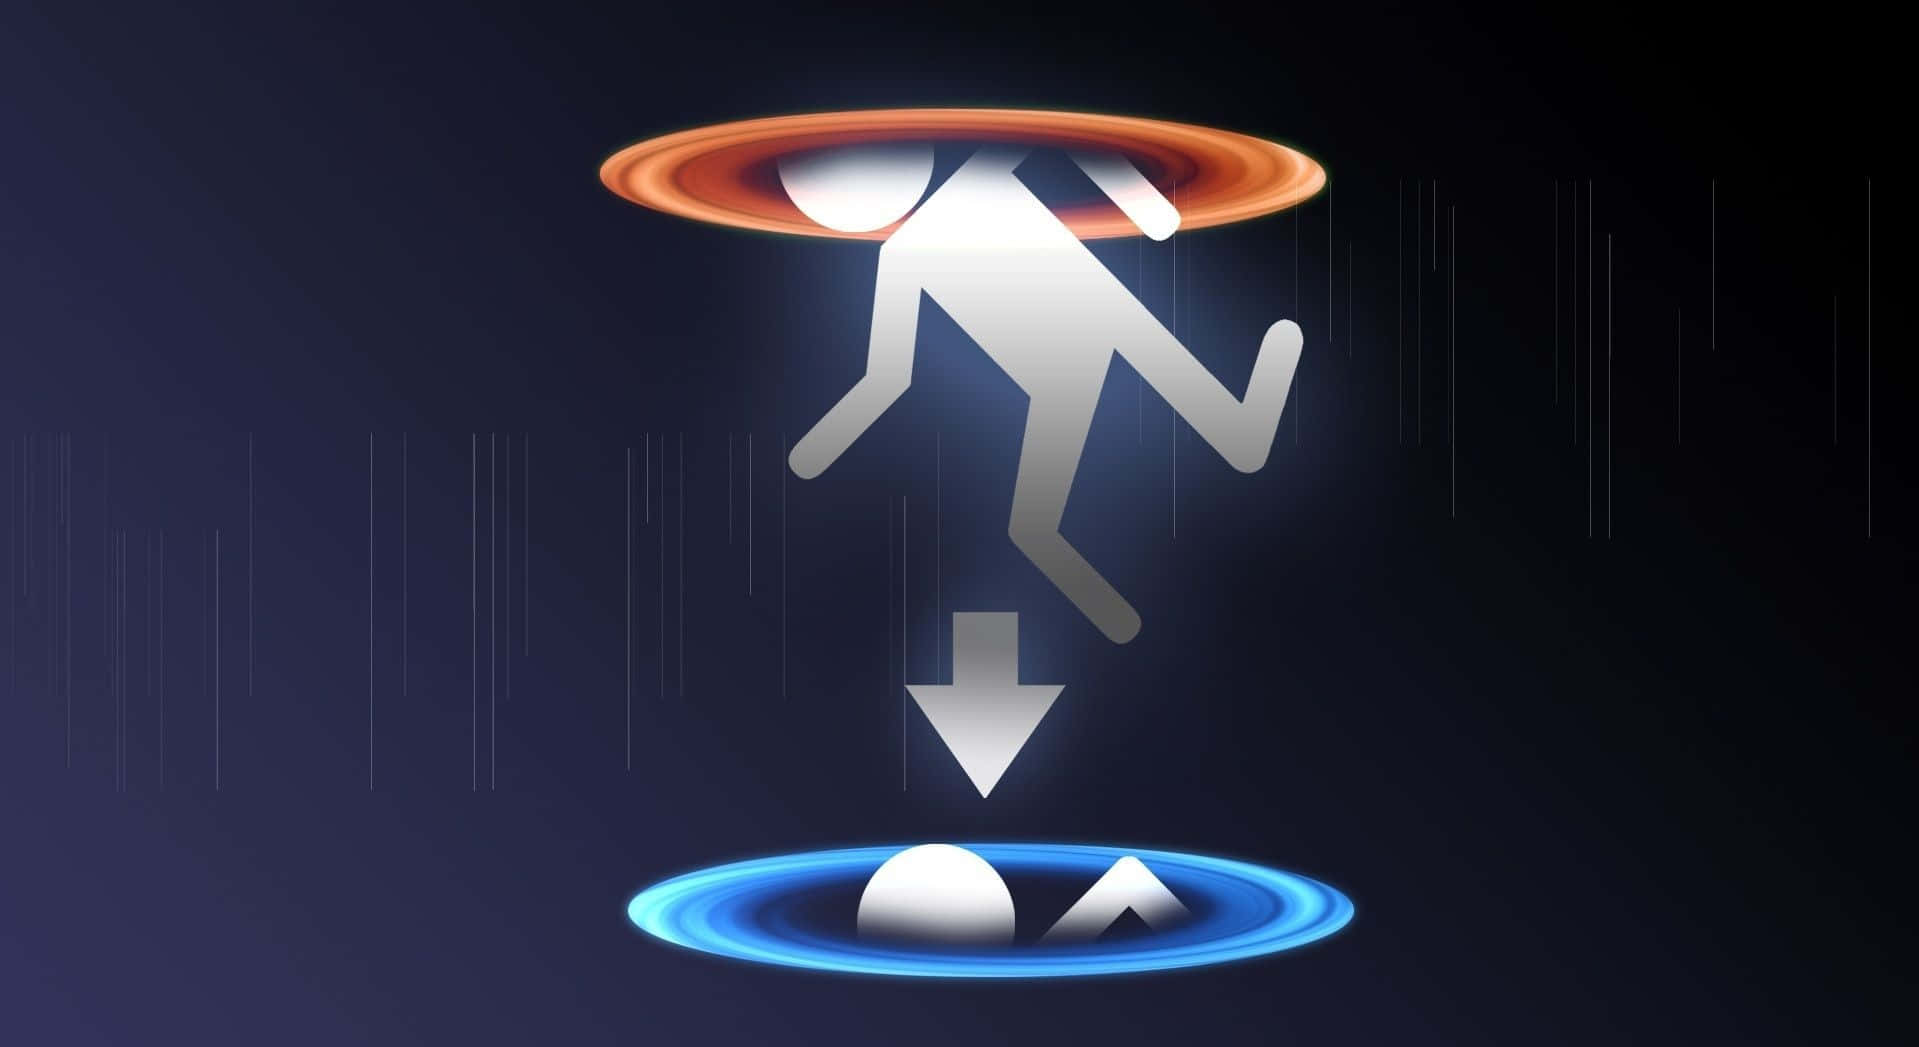 Find your way out of Aperture Science